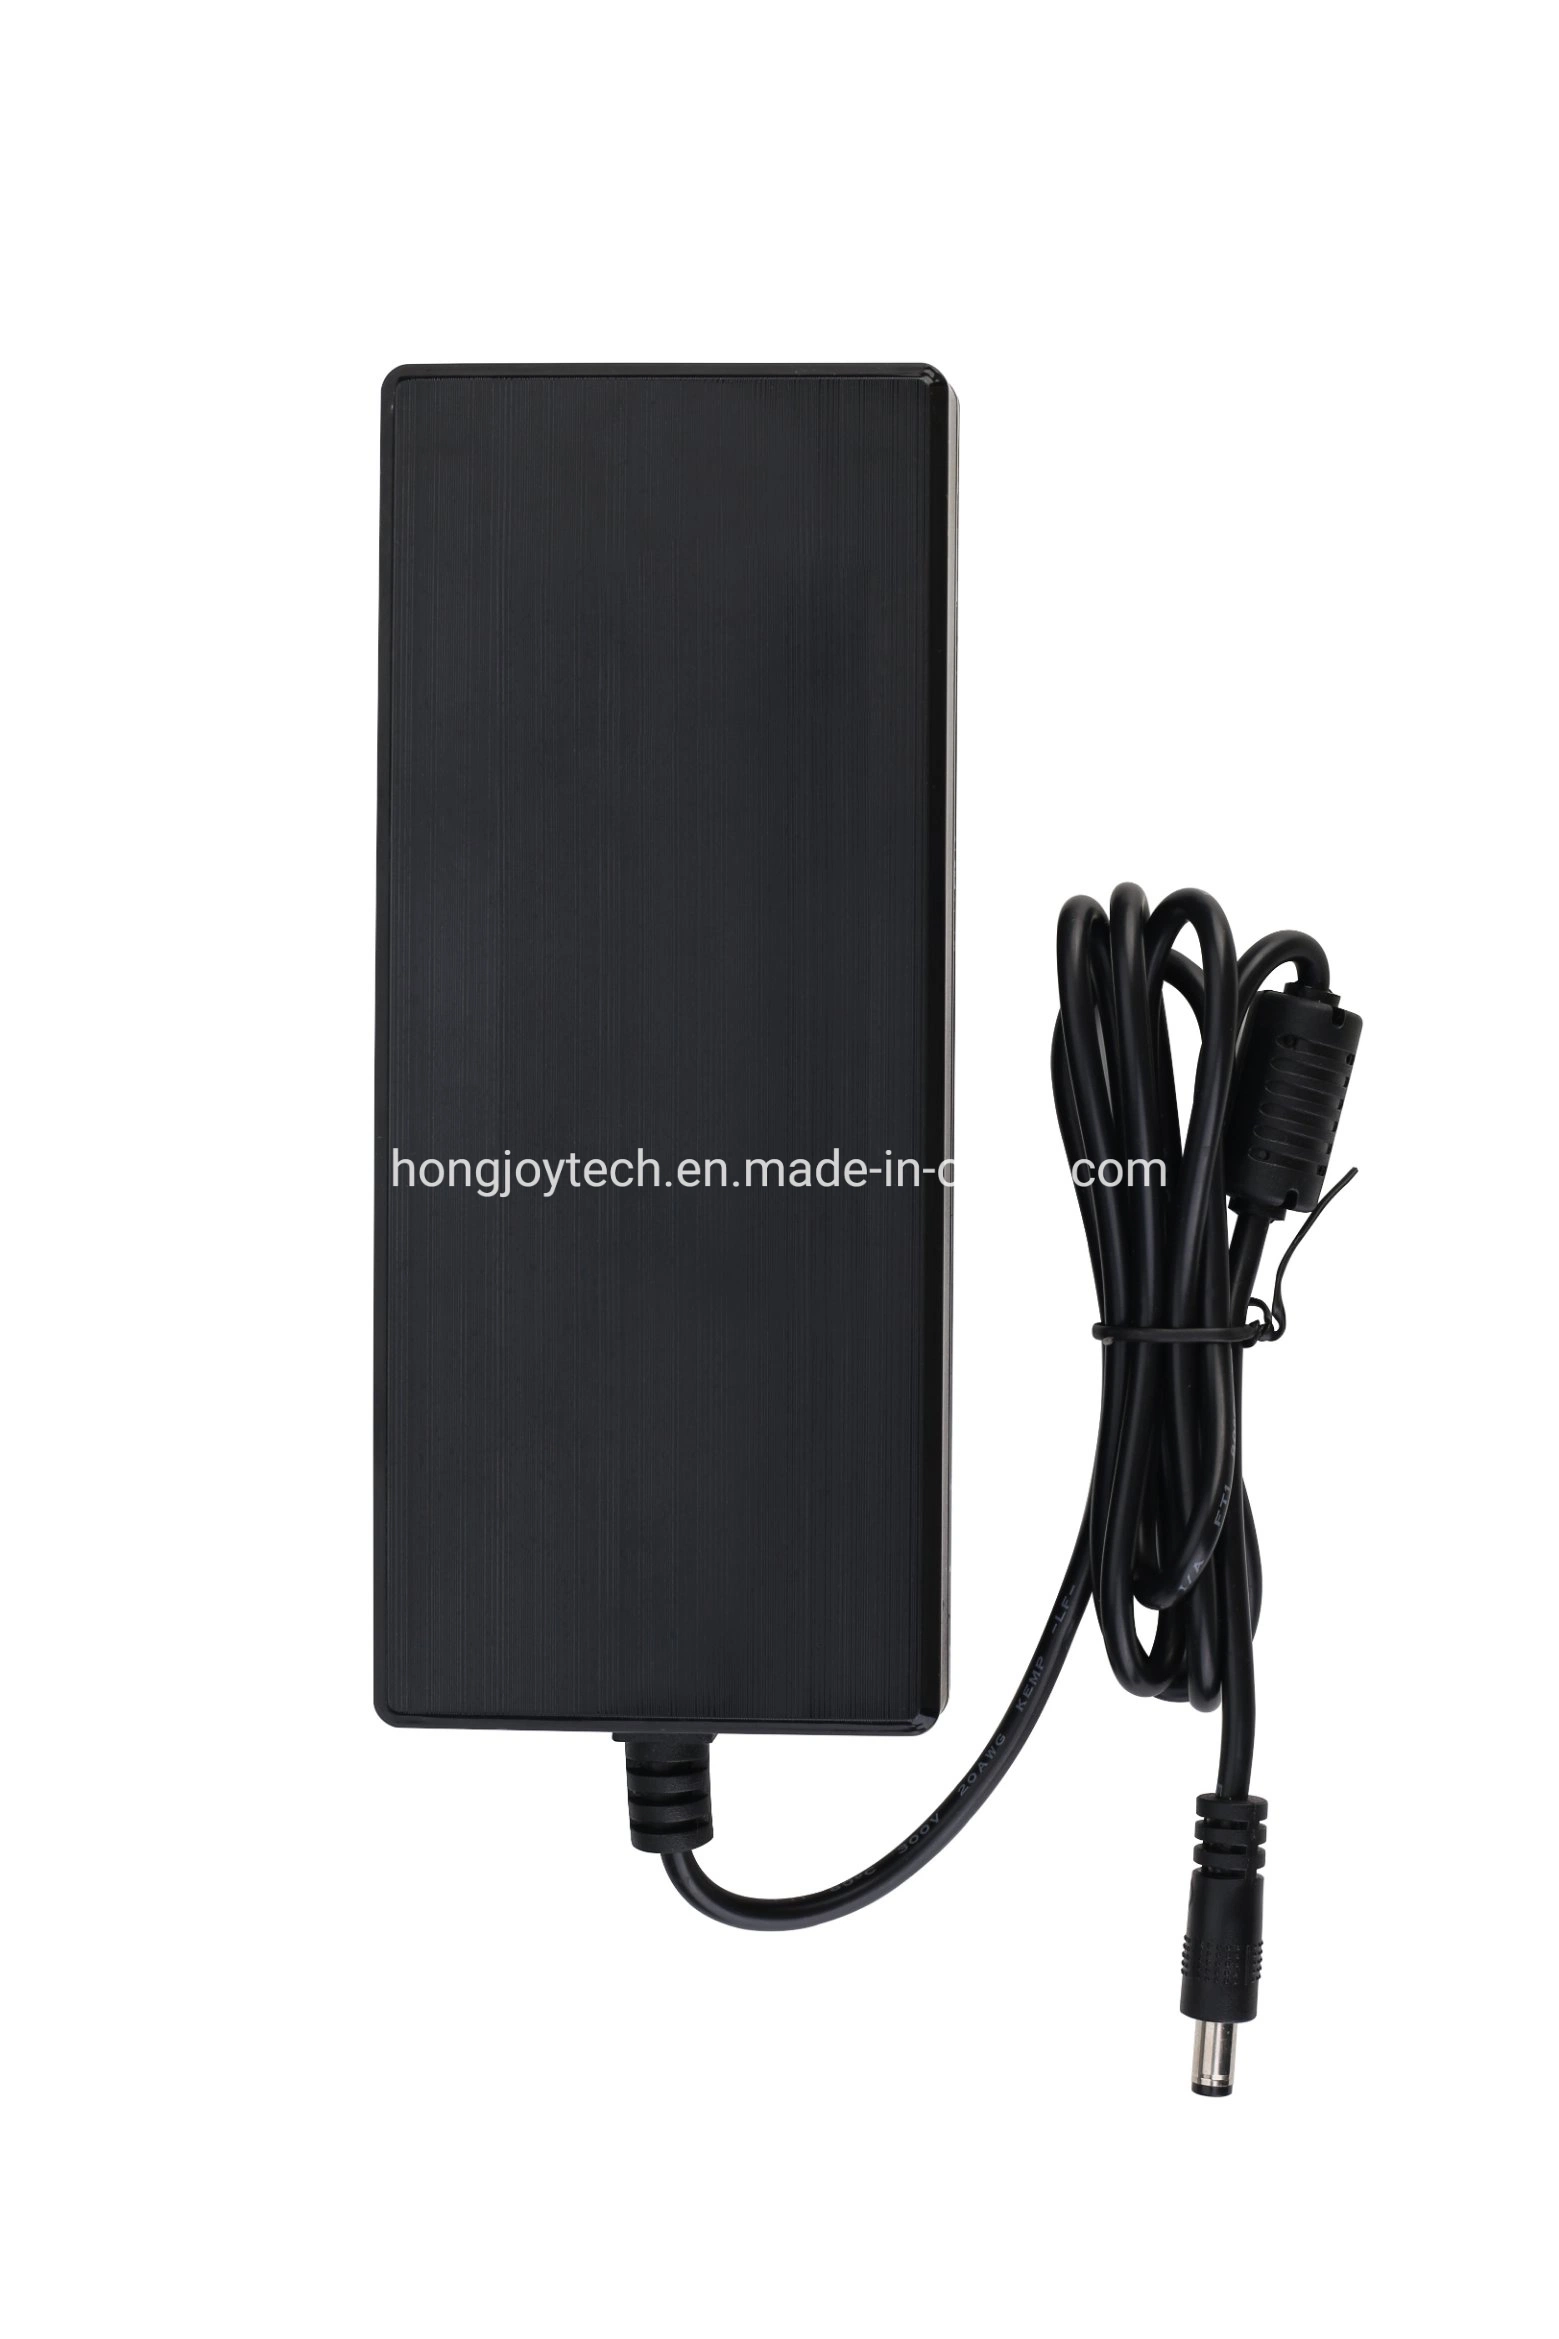 OEM/ODM 19V 3.42A 19.5V 3.34A Replacement AC DC Battery Charger Universal Power Adapter for Laptop Desktop Computer with Fast Charging and AC Power Cord